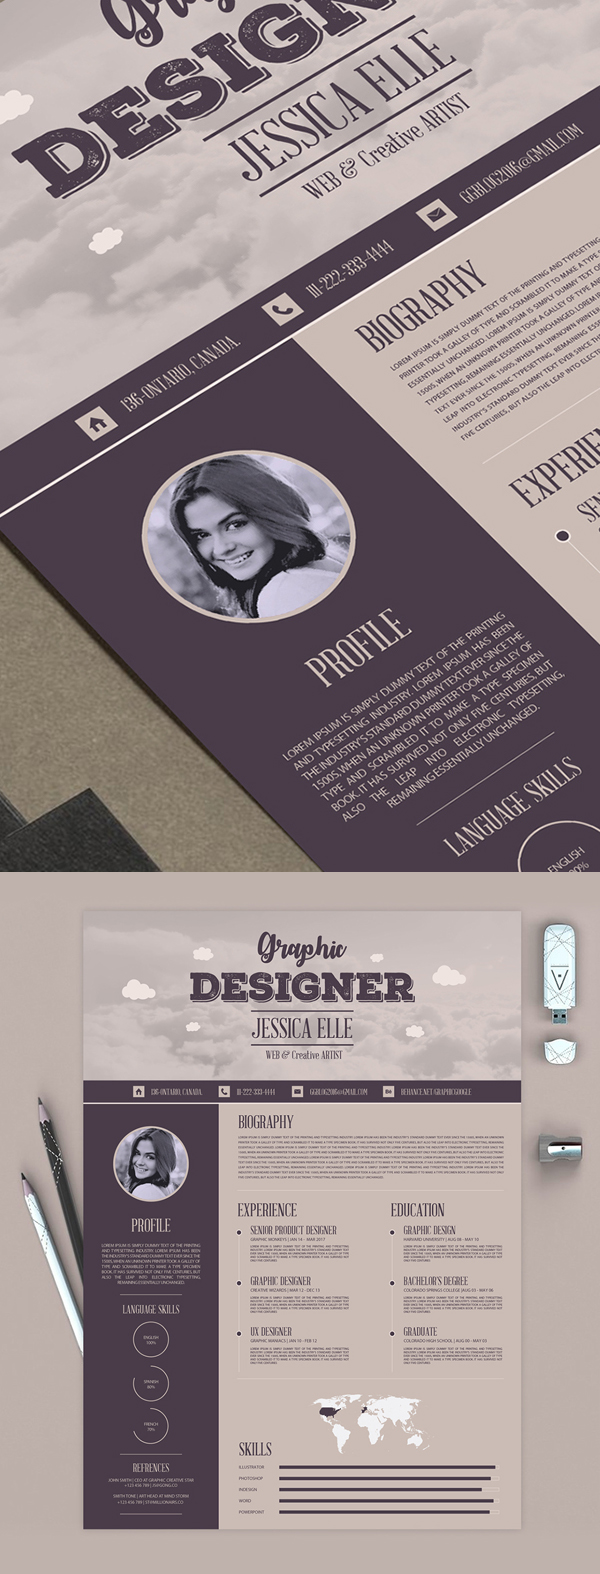 50 Free Resume Templates: Best Of 2018 -  16